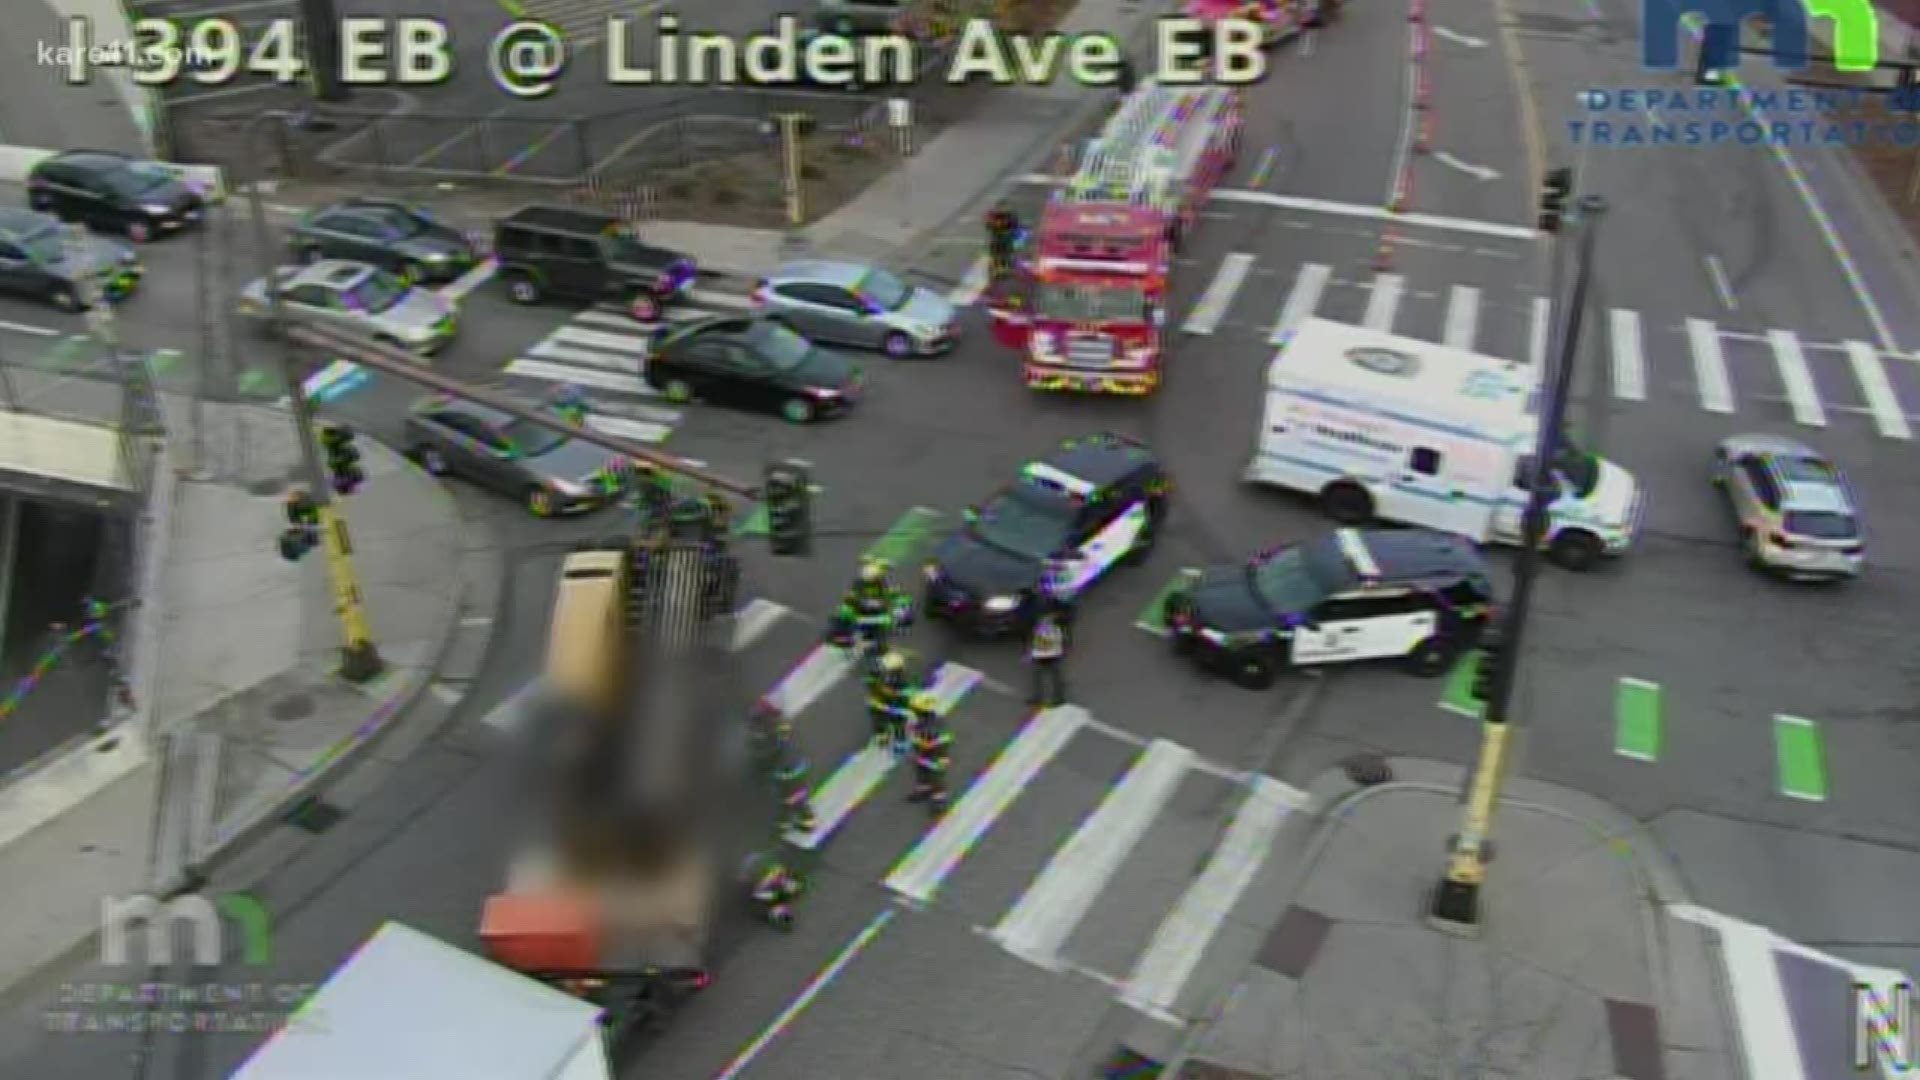 The incident happened at the intersection of 12th Street N and Linden Ave. in downtown Minneapolis.